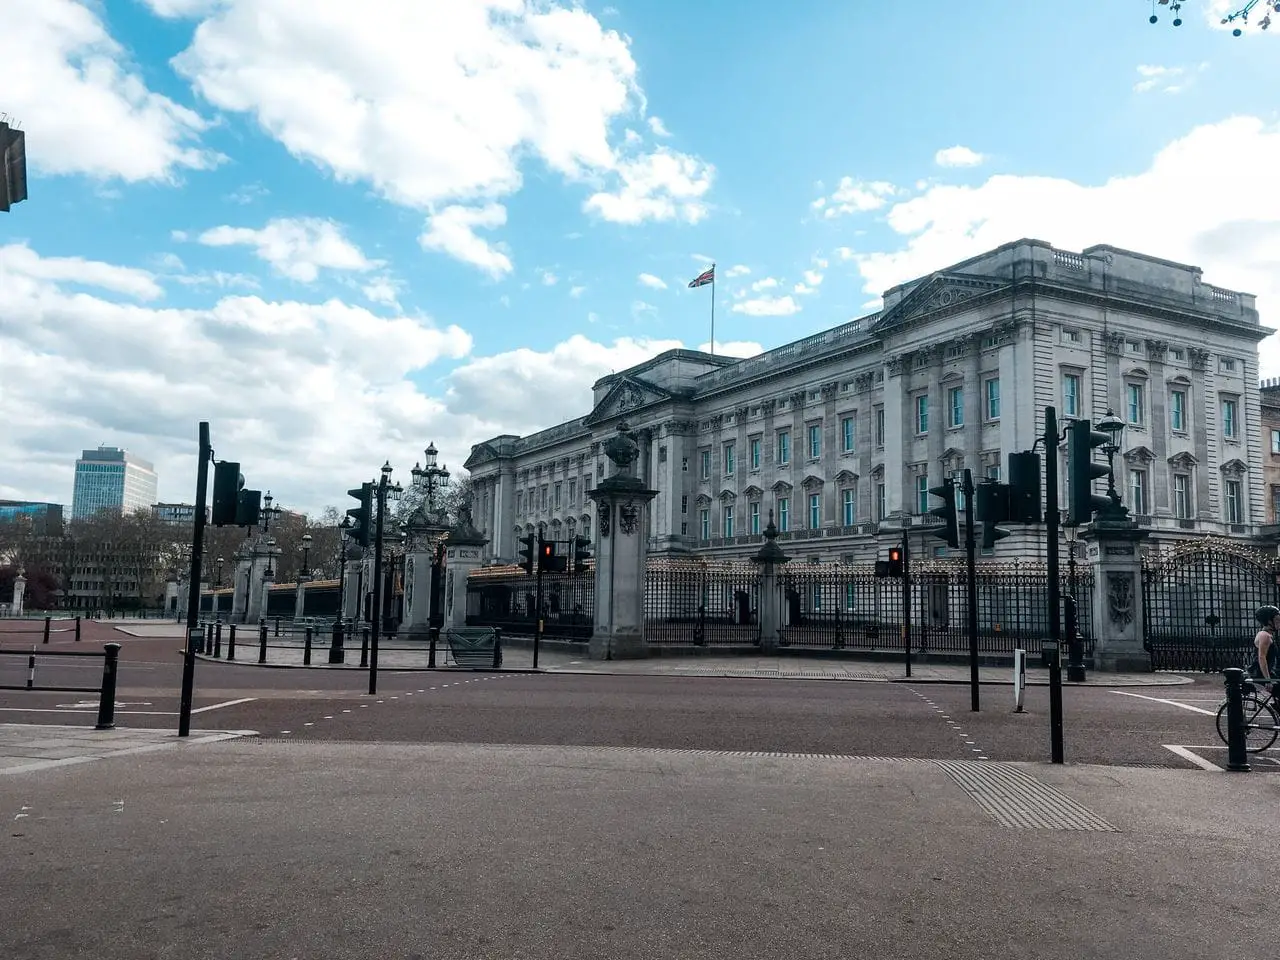 Buckingham Palace during the April 2020 lockdown